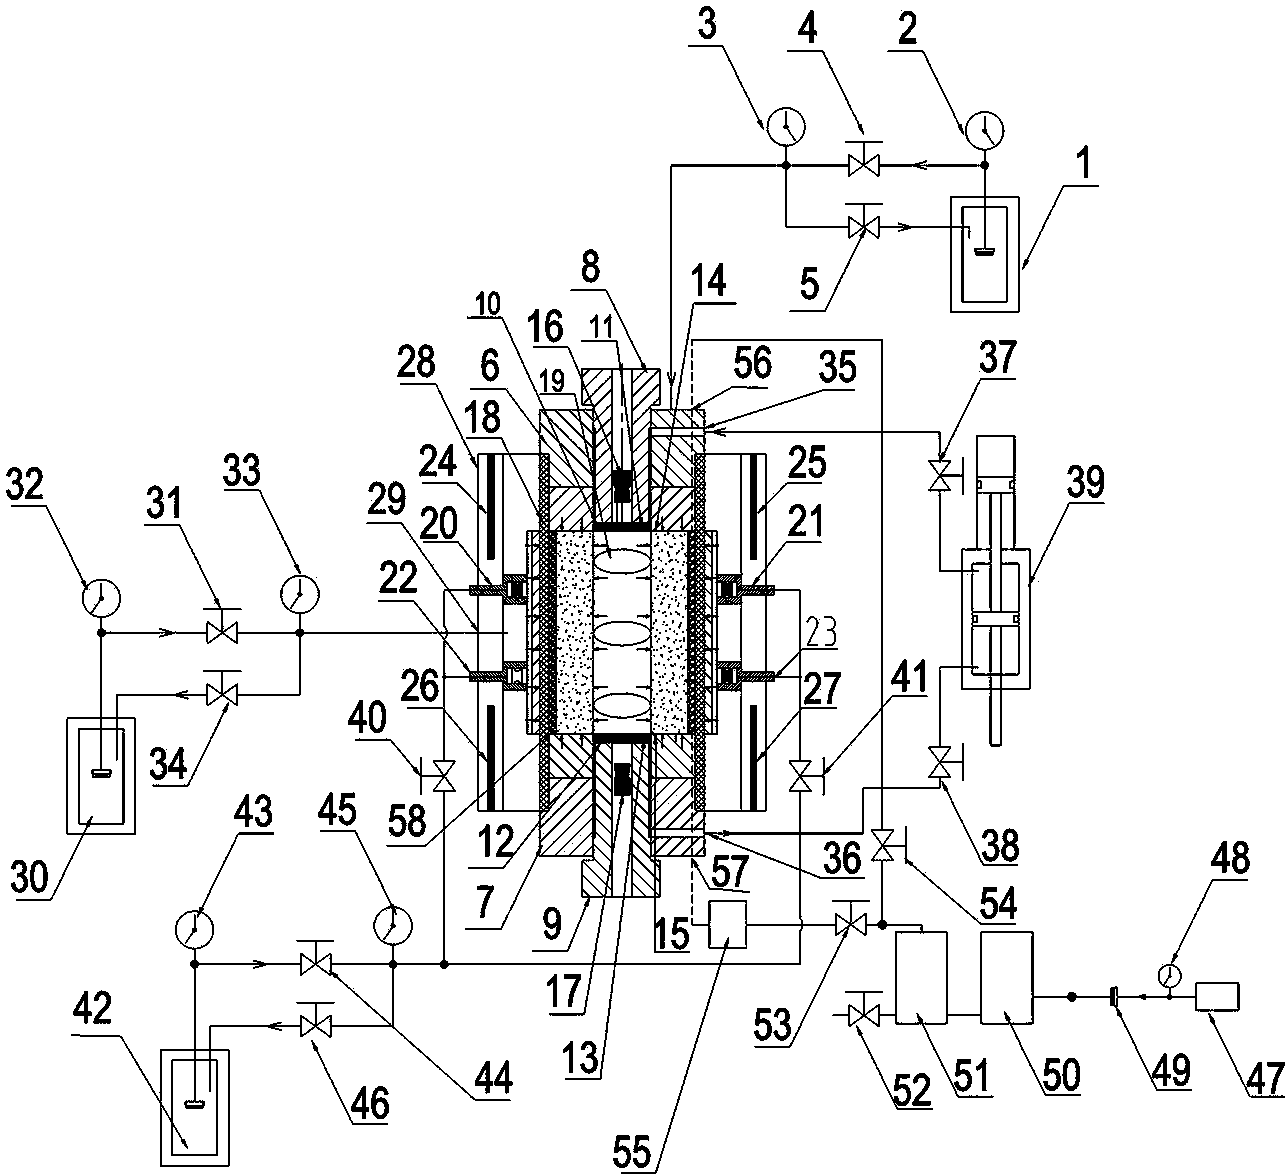 Method for evaluating simulation of full-size well wall stability